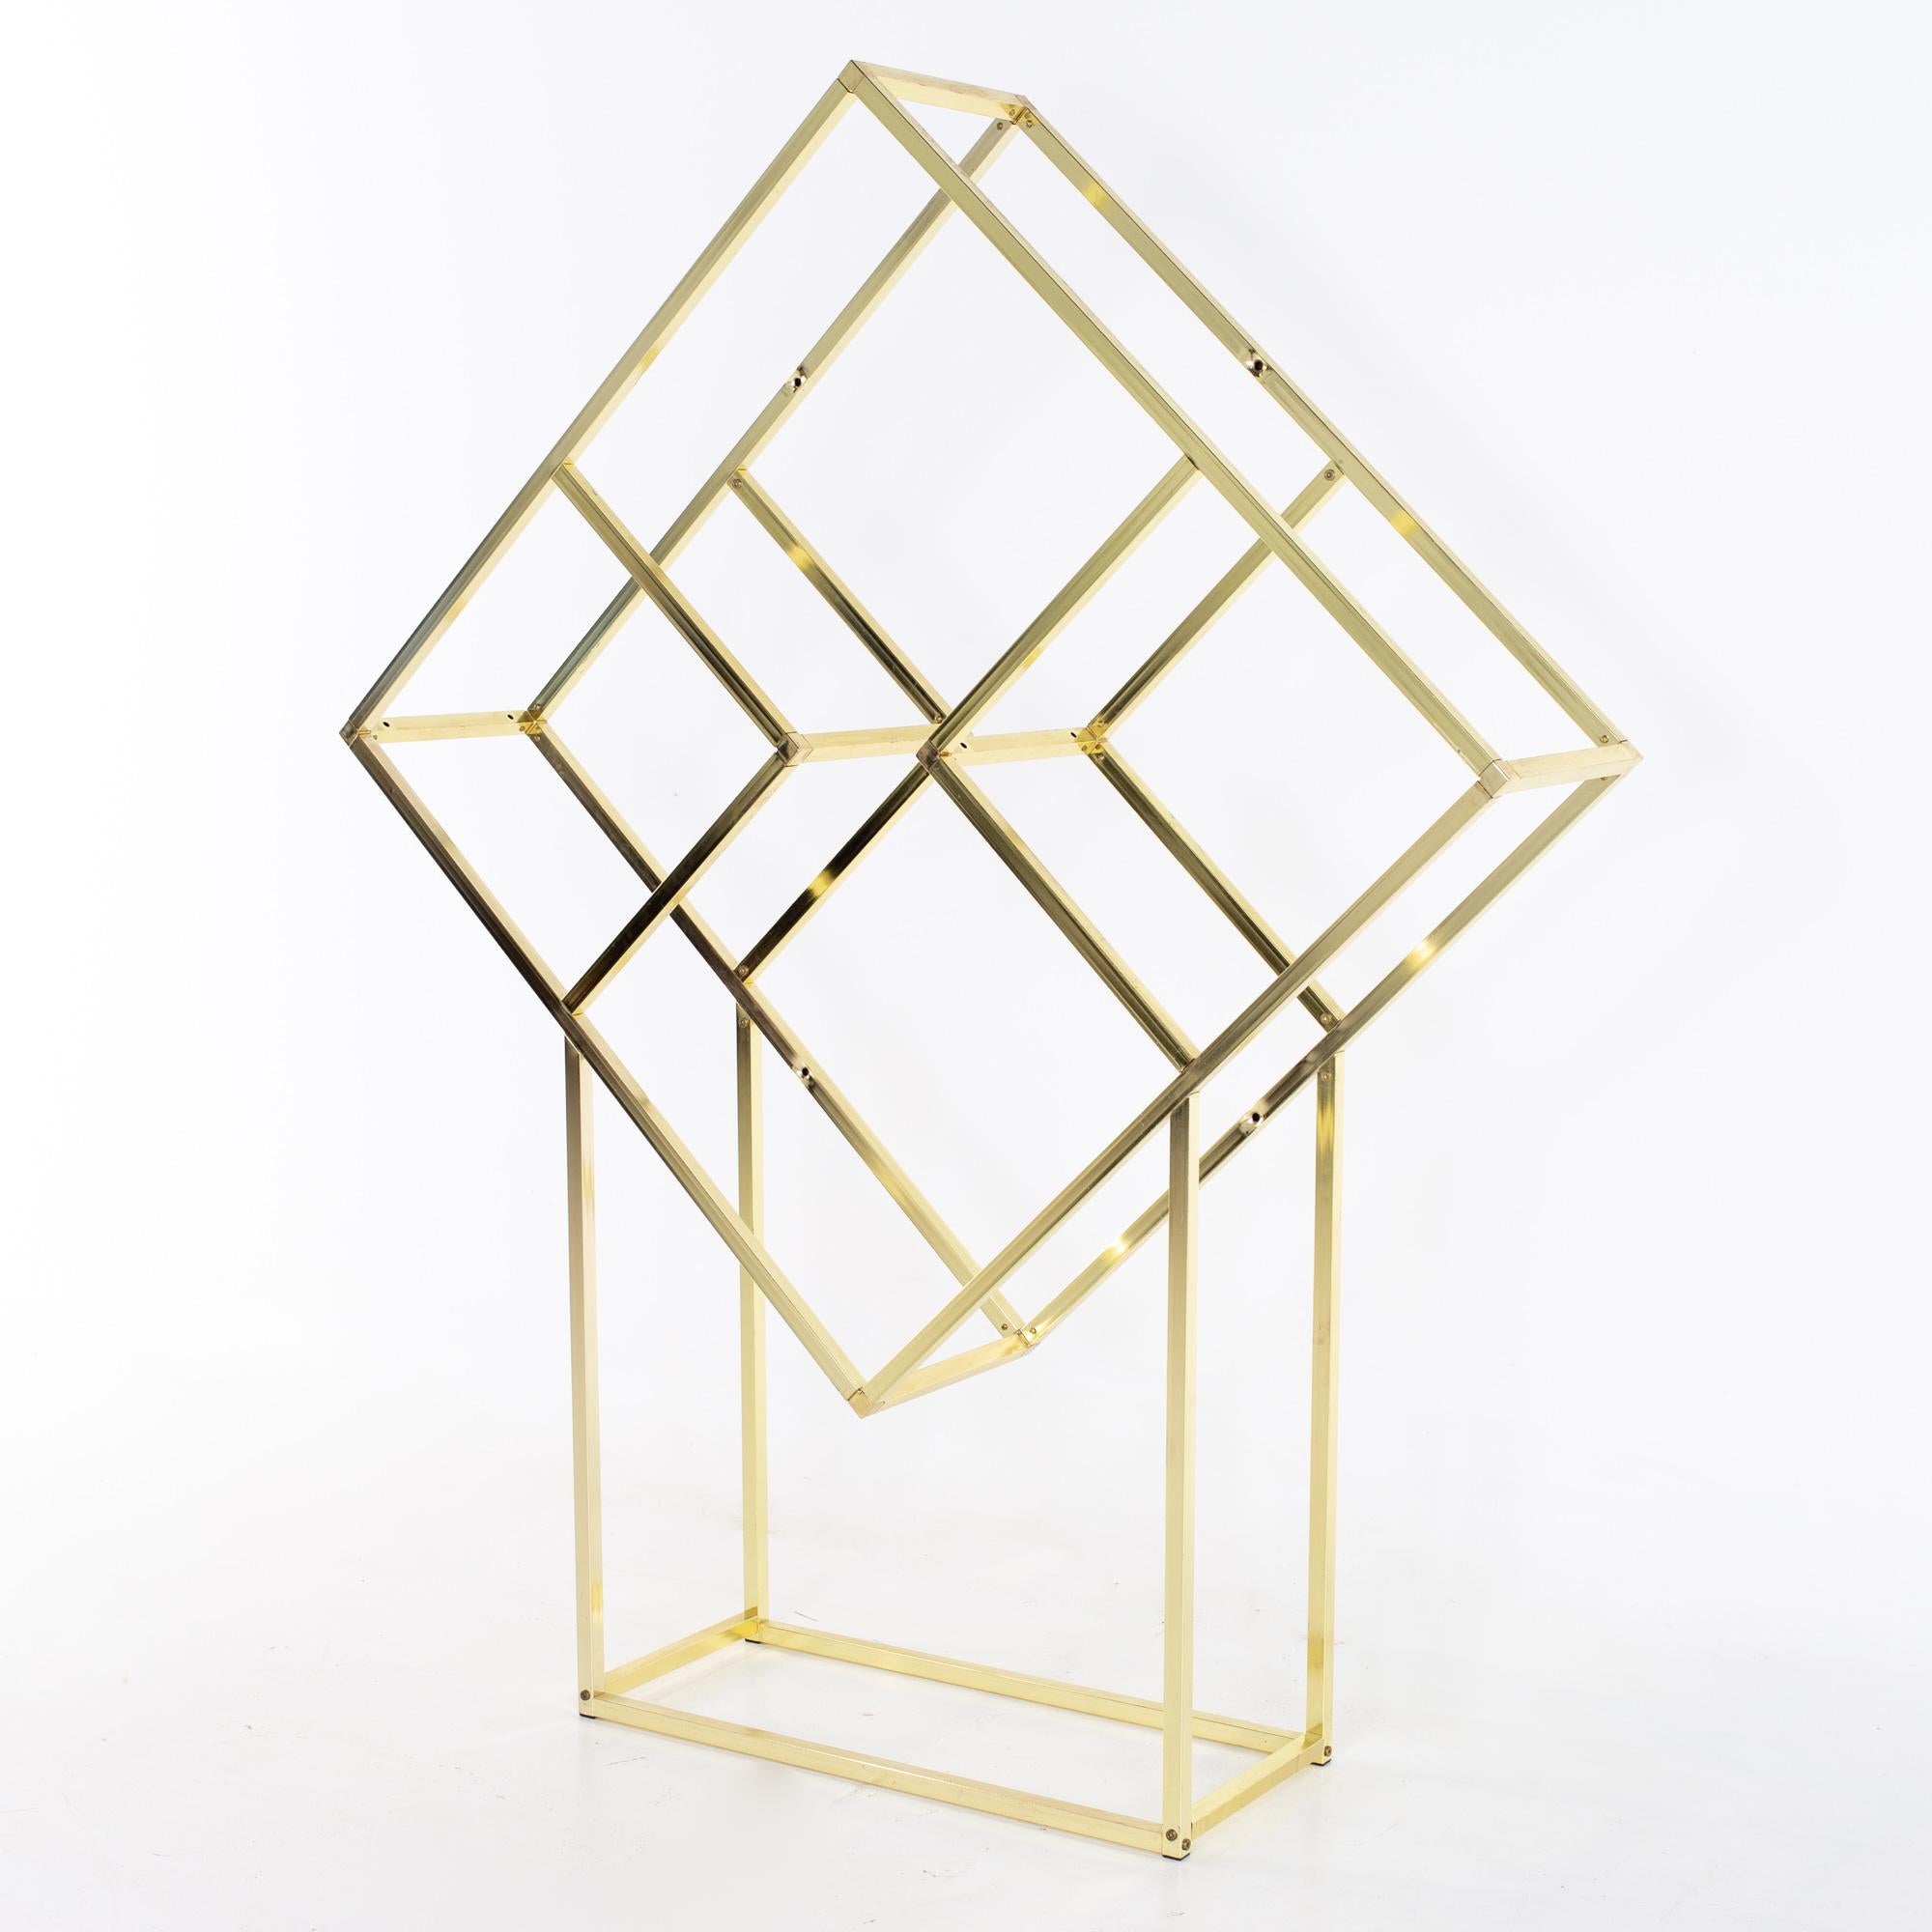 Milo Baughman style mid century brass and glass diamond étagère
Etagere measures: 52 wide x 12 deep x 64.5 inches high

All pieces of furniture can be had in what we call restored vintage condition. That means the piece is restored upon purchase